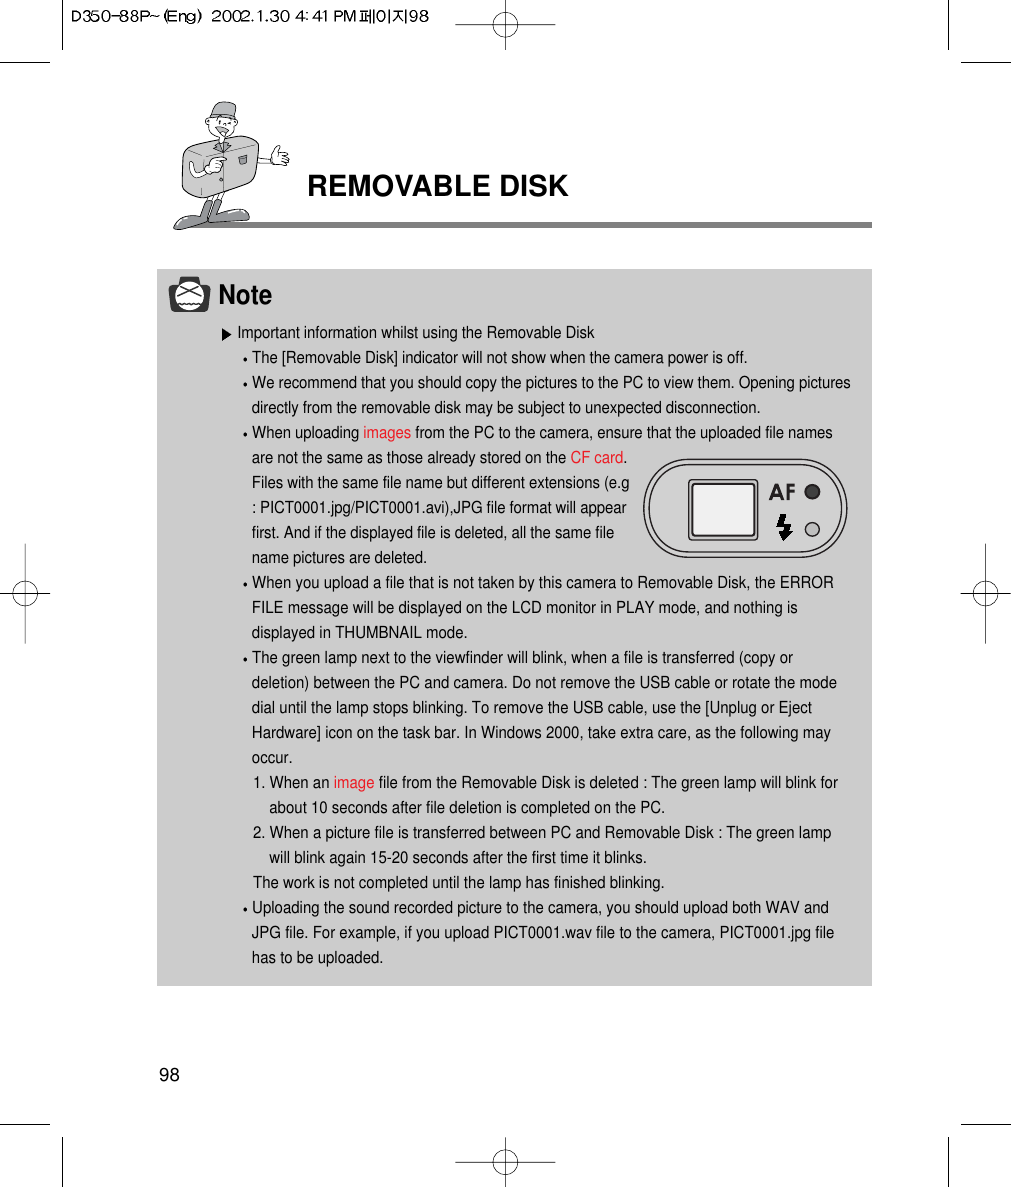 REMOVABLE DISK98NoteImportant information whilst using the Removable DiskThe [Removable Disk] indicator will not show when the camera power is off.We recommend that you should copy the pictures to the PC to view them. Opening picturesdirectly from the removable disk may be subject to unexpected disconnection.When uploading images from the PC to the camera, ensure that the uploaded file namesare not the same as those already stored on the CF card.Files with the same file name but different extensions (e.g: PICT0001.jpg/PICT0001.avi),JPG file format will appearfirst. And if the displayed file is deleted, all the same filename pictures are deleted.When you upload a file that is not taken by this camera to Removable Disk, the ERRORFILE message will be displayed on the LCD monitor in PLAY mode, and nothing isdisplayed in THUMBNAIL mode.The green lamp next to the viewfinder will blink, when a file is transferred (copy ordeletion) between the PC and camera. Do not remove the USB cable or rotate the modedial until the lamp stops blinking. To remove the USB cable, use the [Unplug or EjectHardware] icon on the task bar. In Windows 2000, take extra care, as the following mayoccur.1. When an image file from the Removable Disk is deleted : The green lamp will blink forabout 10 seconds after file deletion is completed on the PC.2. When a picture file is transferred between PC and Removable Disk : The green lampwill blink again 15-20 seconds after the first time it blinks.The work is not completed until the lamp has finished blinking.Uploading the sound recorded picture to the camera, you should upload both WAV andJPG file. For example, if you upload PICT0001.wav file to the camera, PICT0001.jpg filehas to be uploaded.